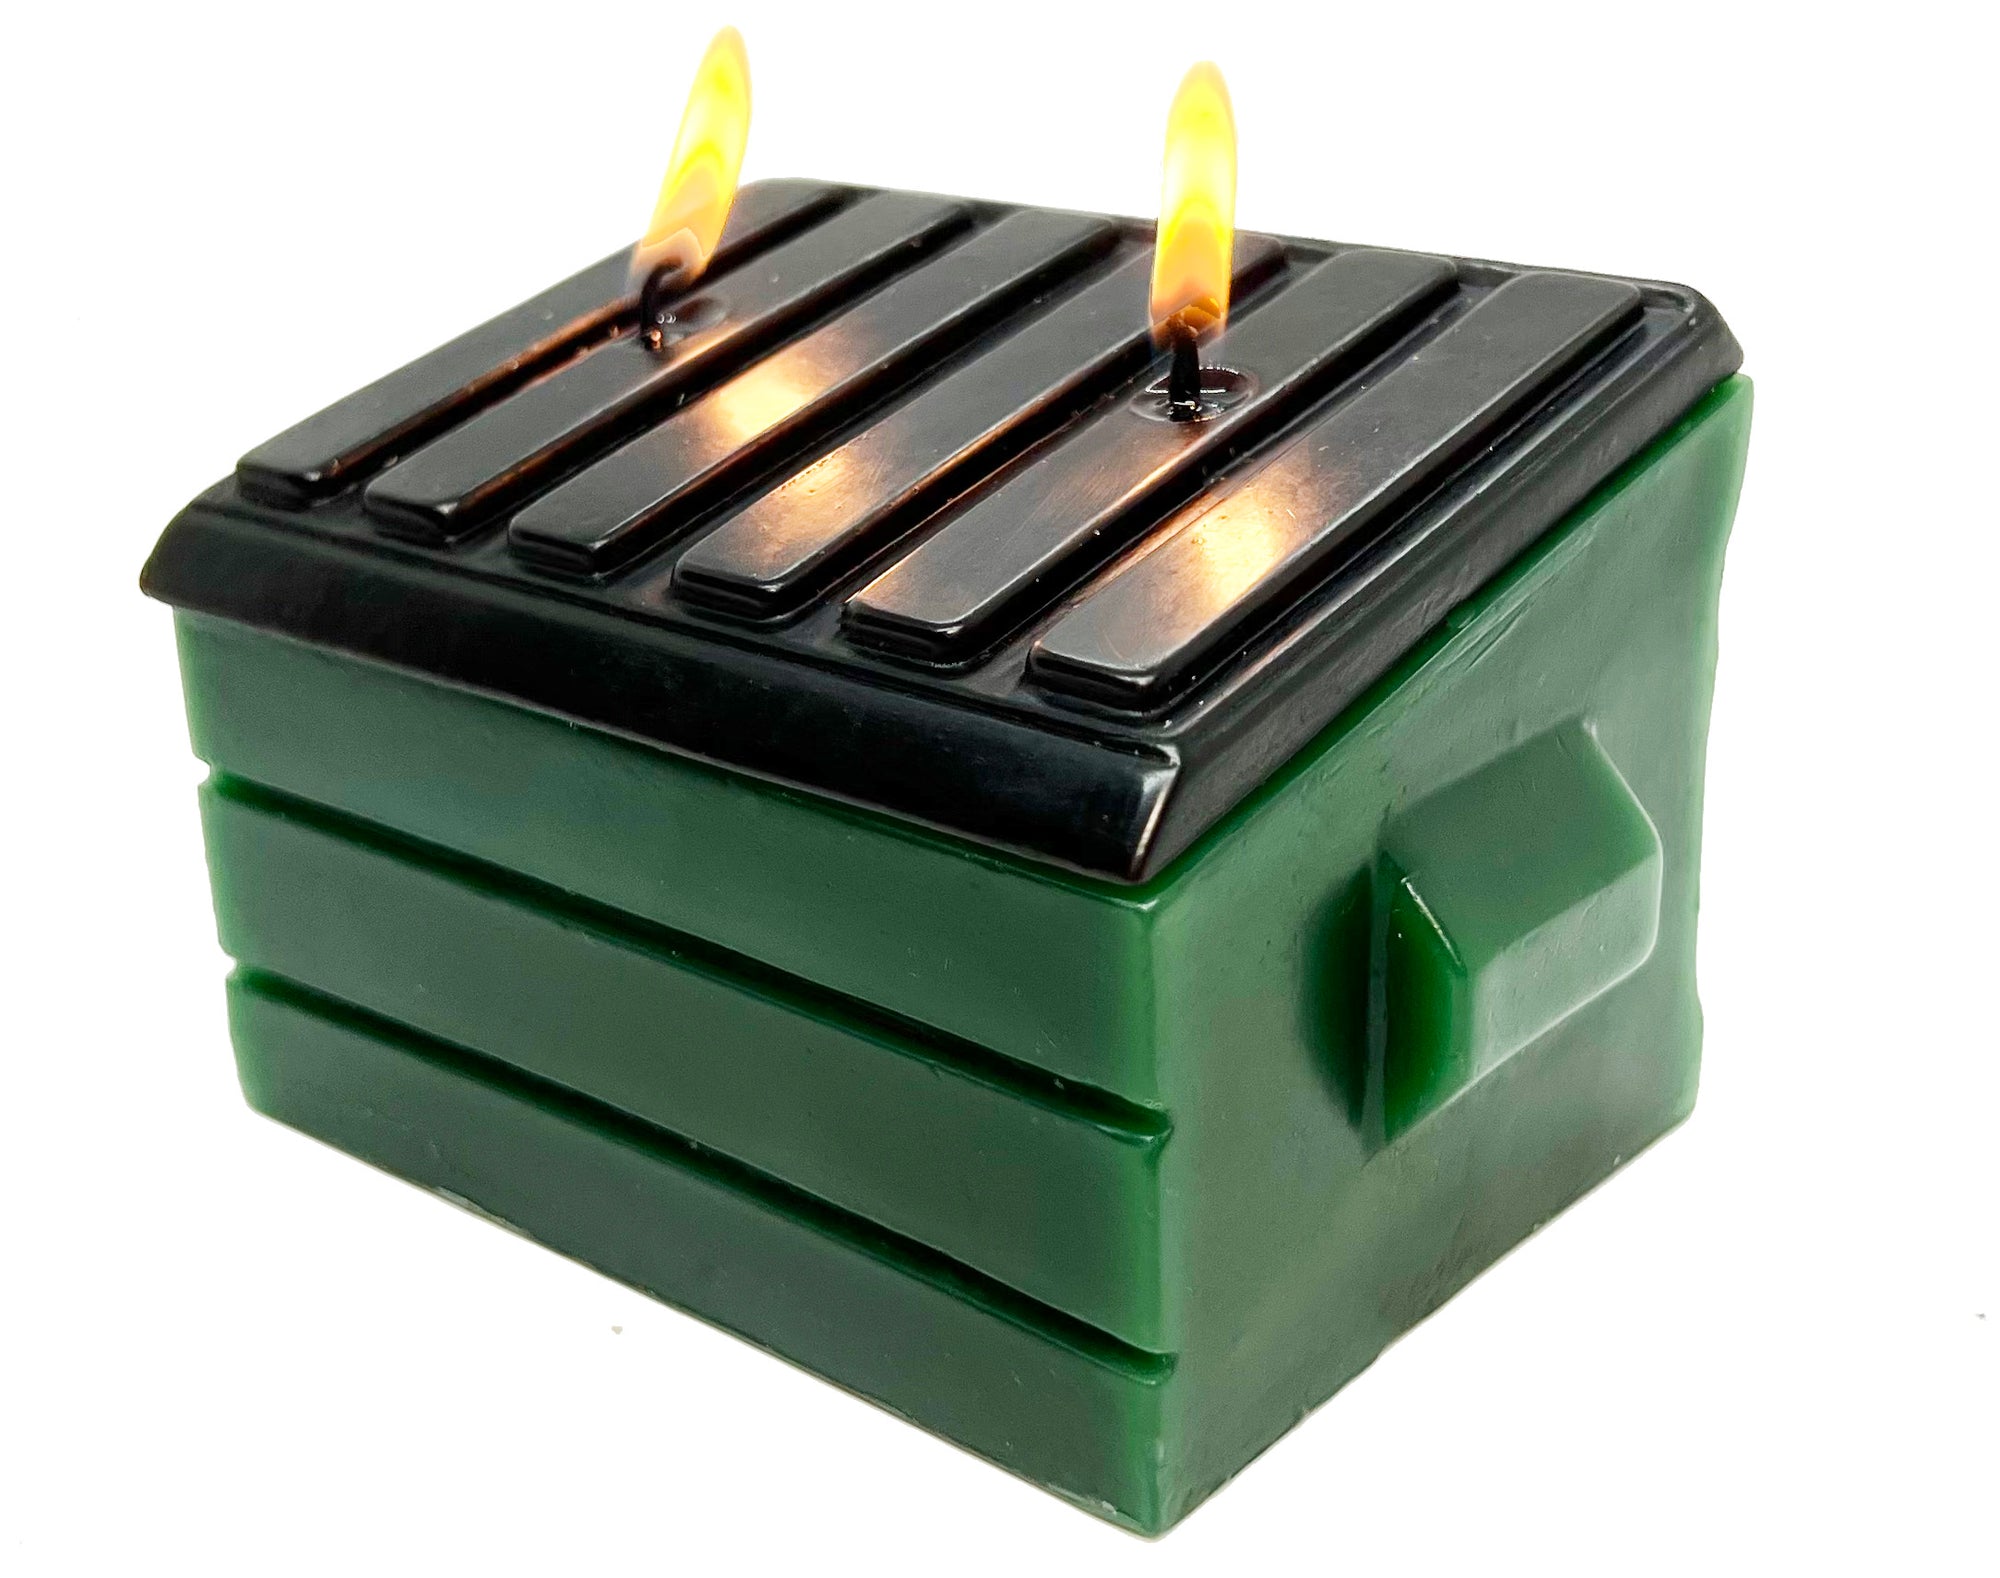 Dumpster Fire Novelty Candle